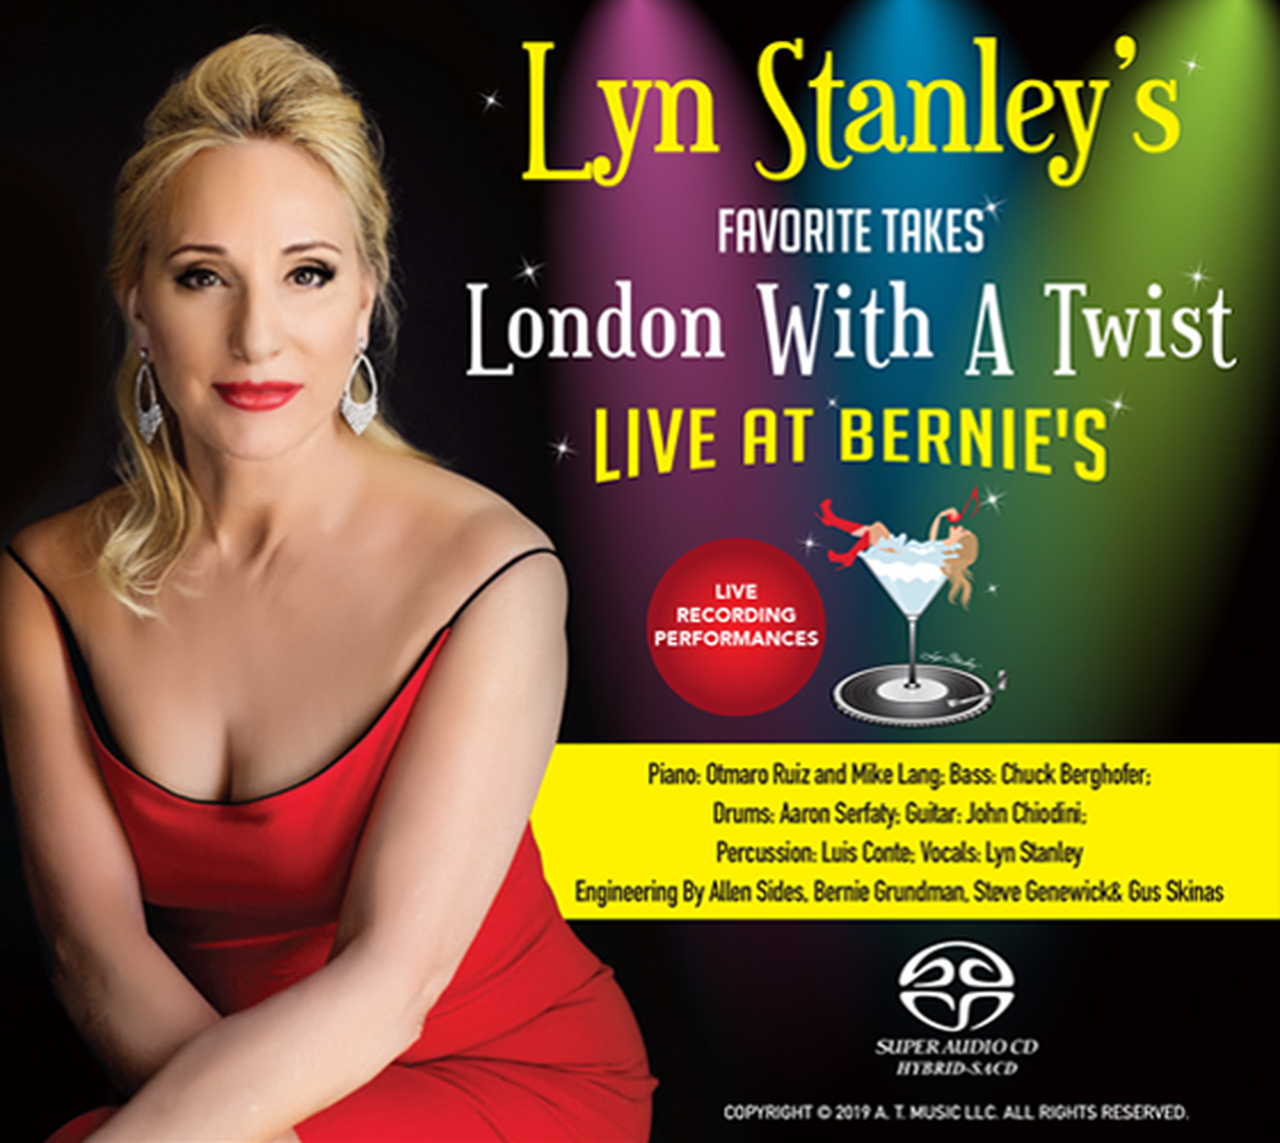 Lyn Stanley's Favorite Takes: London With A Twist Live At Bernie’s